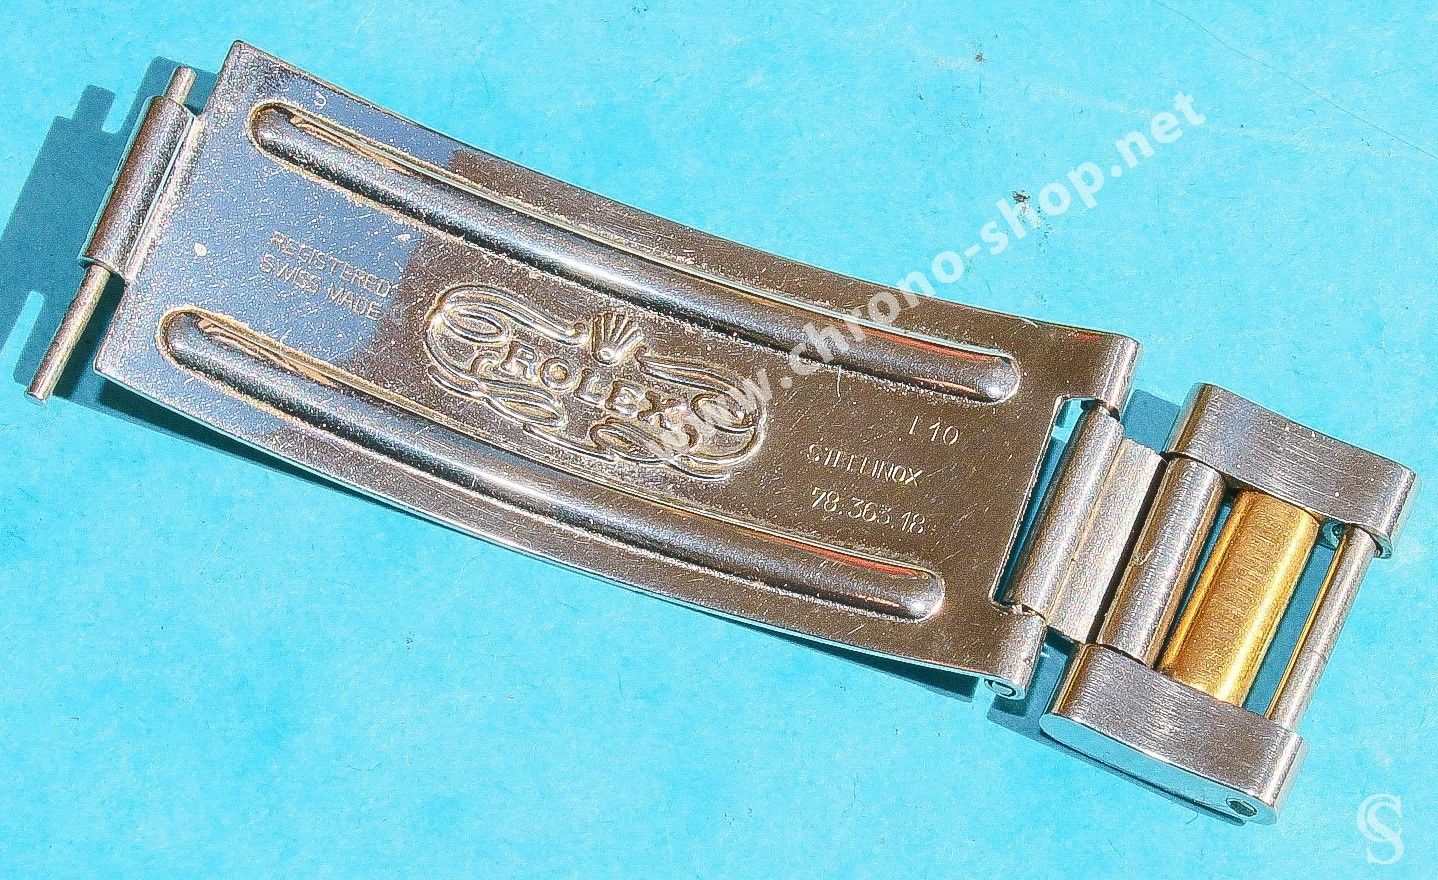 ROLEX TUTONE OYSTER 78363, 93153 BAND OPENING SIDE CONNECT LINK & CLASP ...